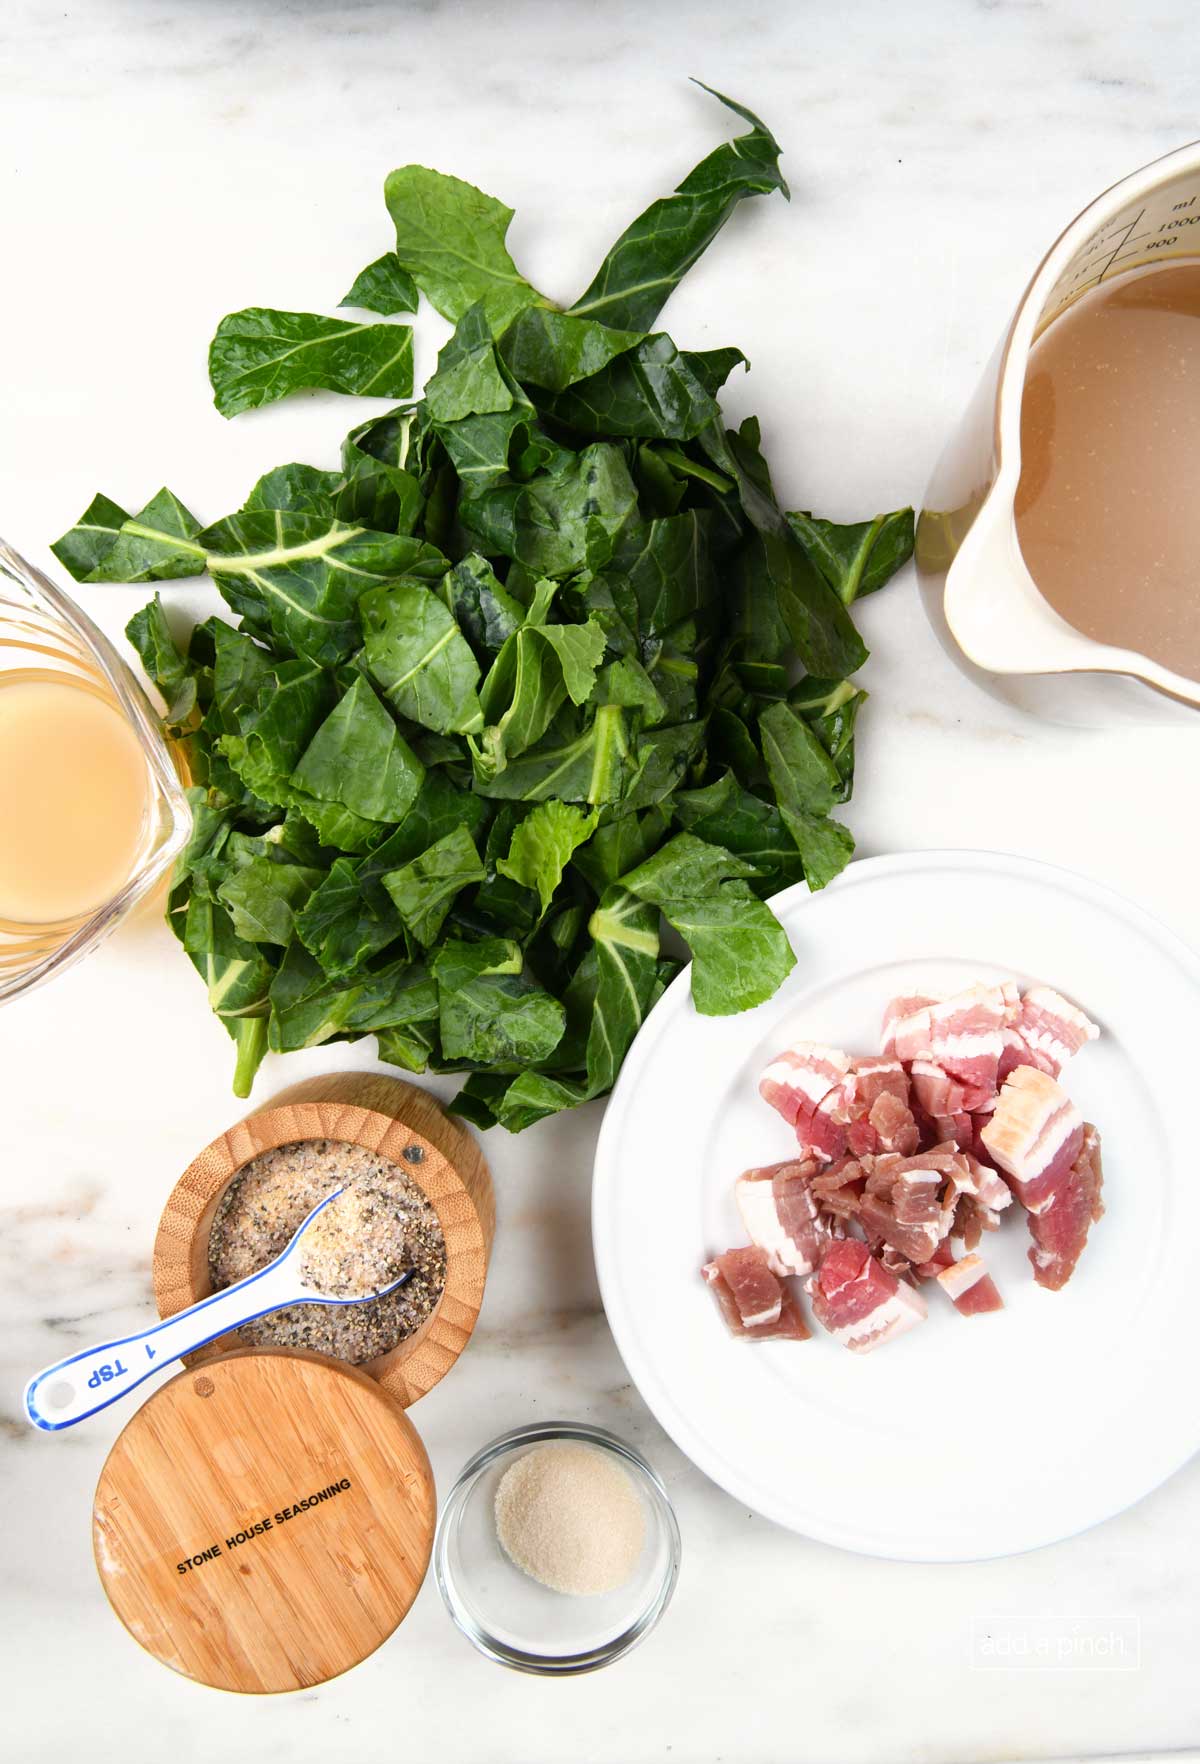 Image of ingredients used to make southern-style collard greens.